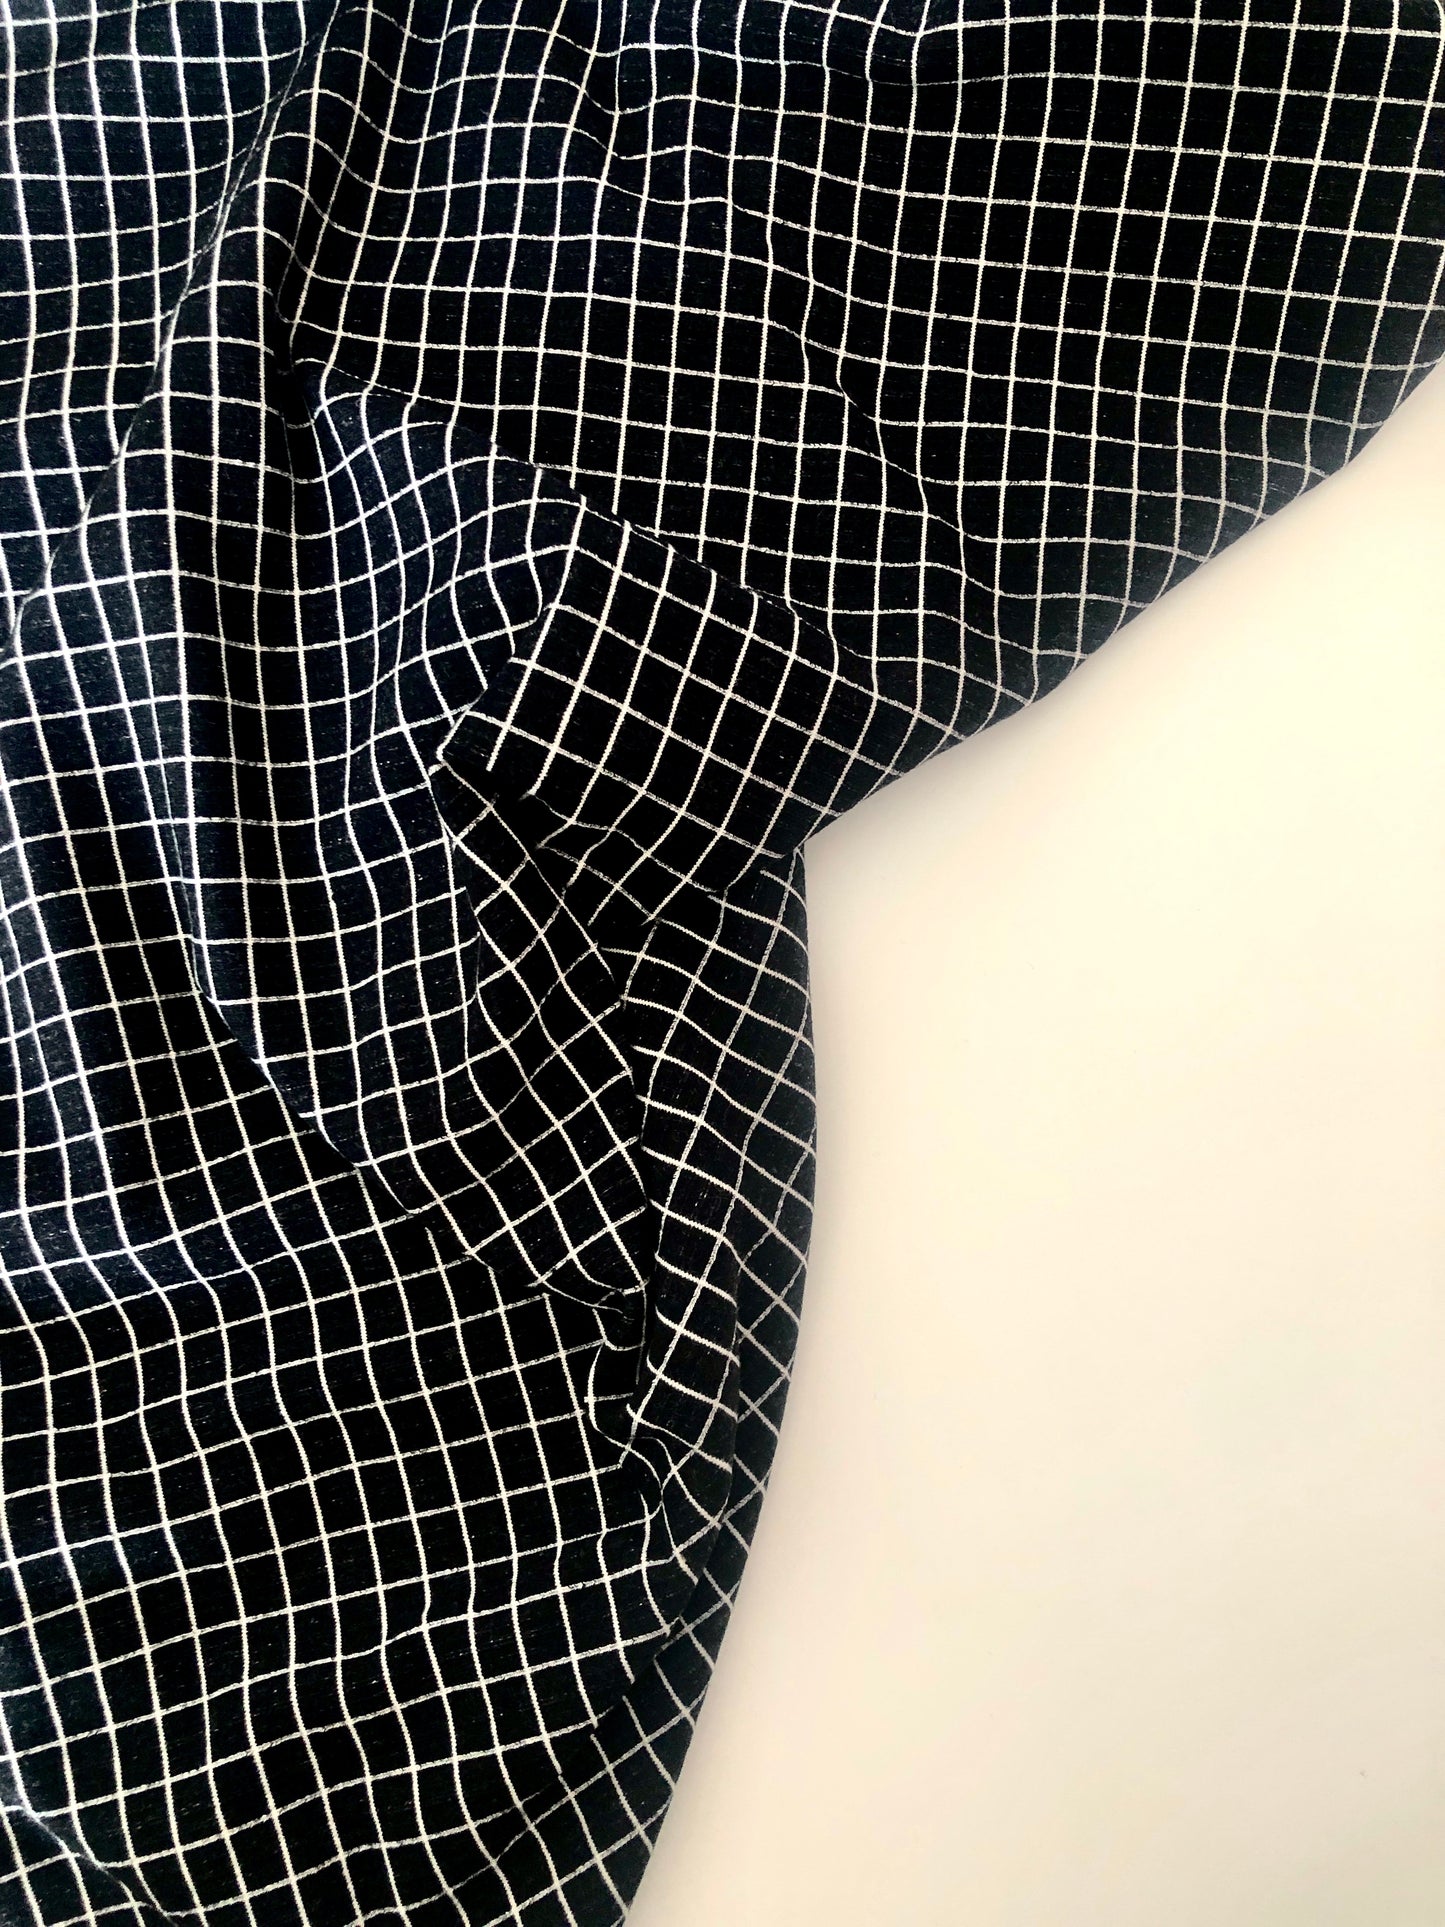 Checkerboard Cotton Jersey - Black - REMNANT - 3m x175cm - FLAW